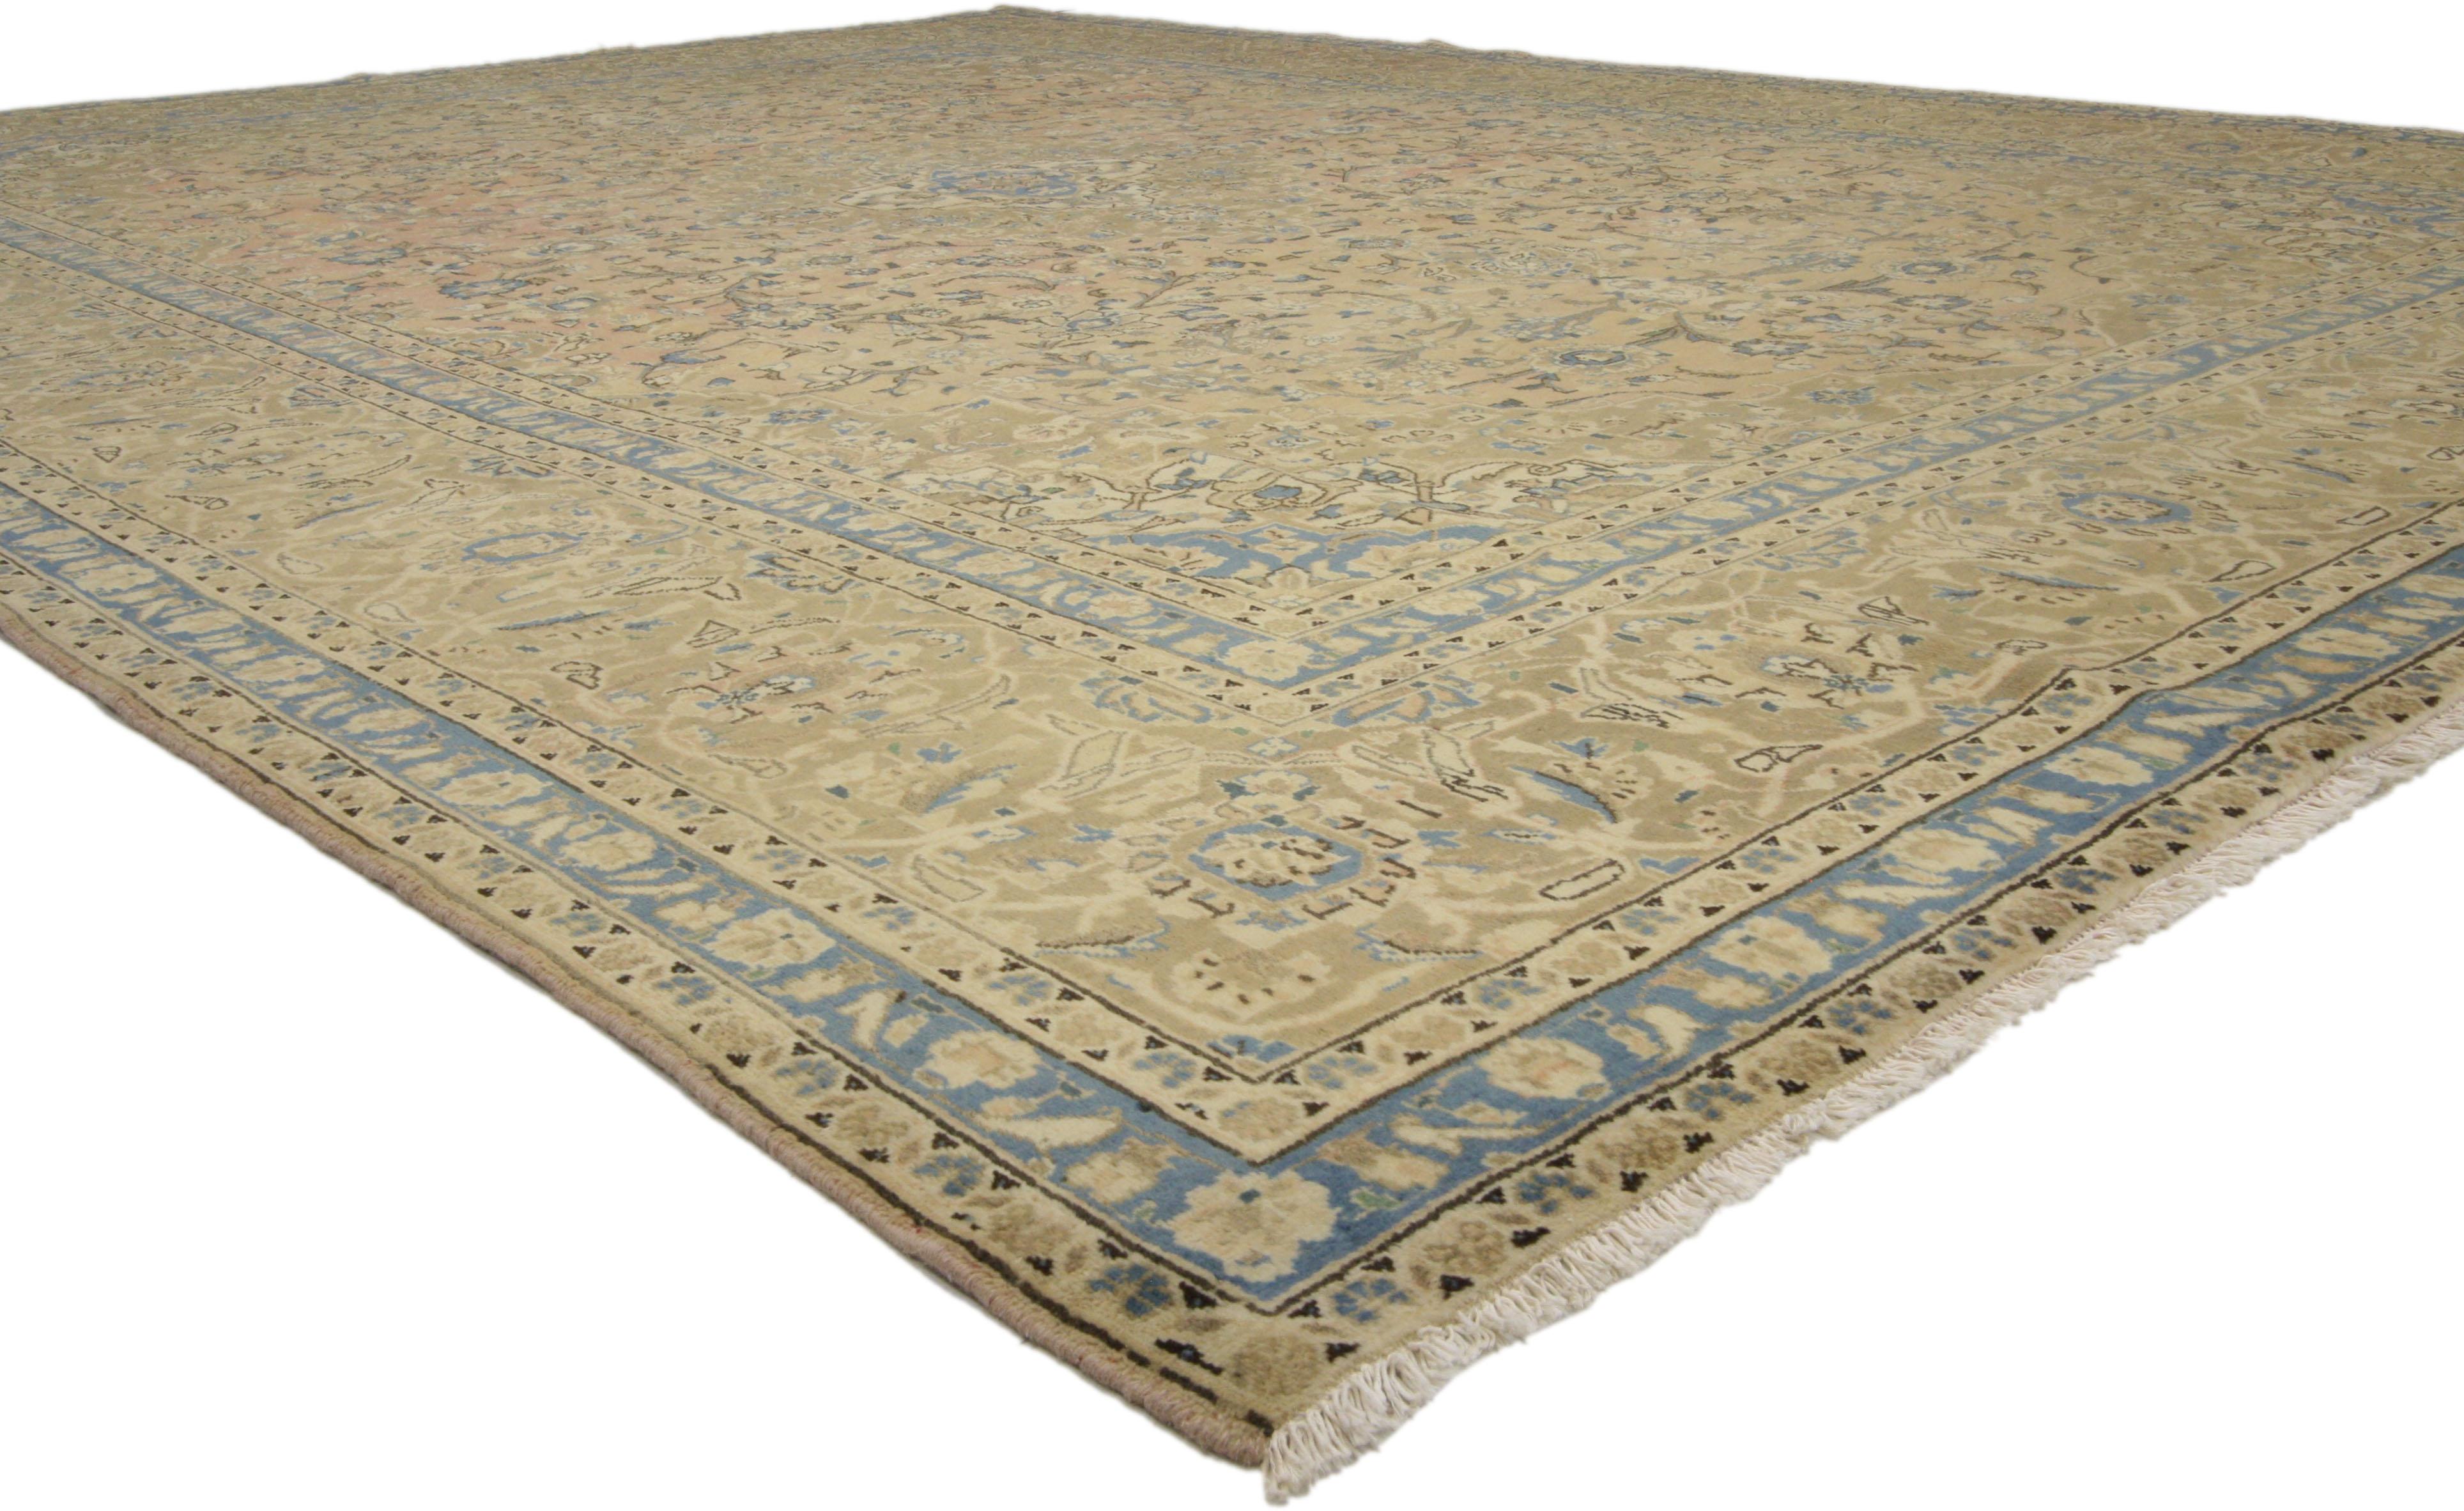 76436, vintage Persian Kashan rug with traditional style. This hand-knotted wool vintage Persian Kashan rug with Traditional style features an elaborate cream and sky-blue medallion with pale brown and ecru accents surrounded by a dense floral